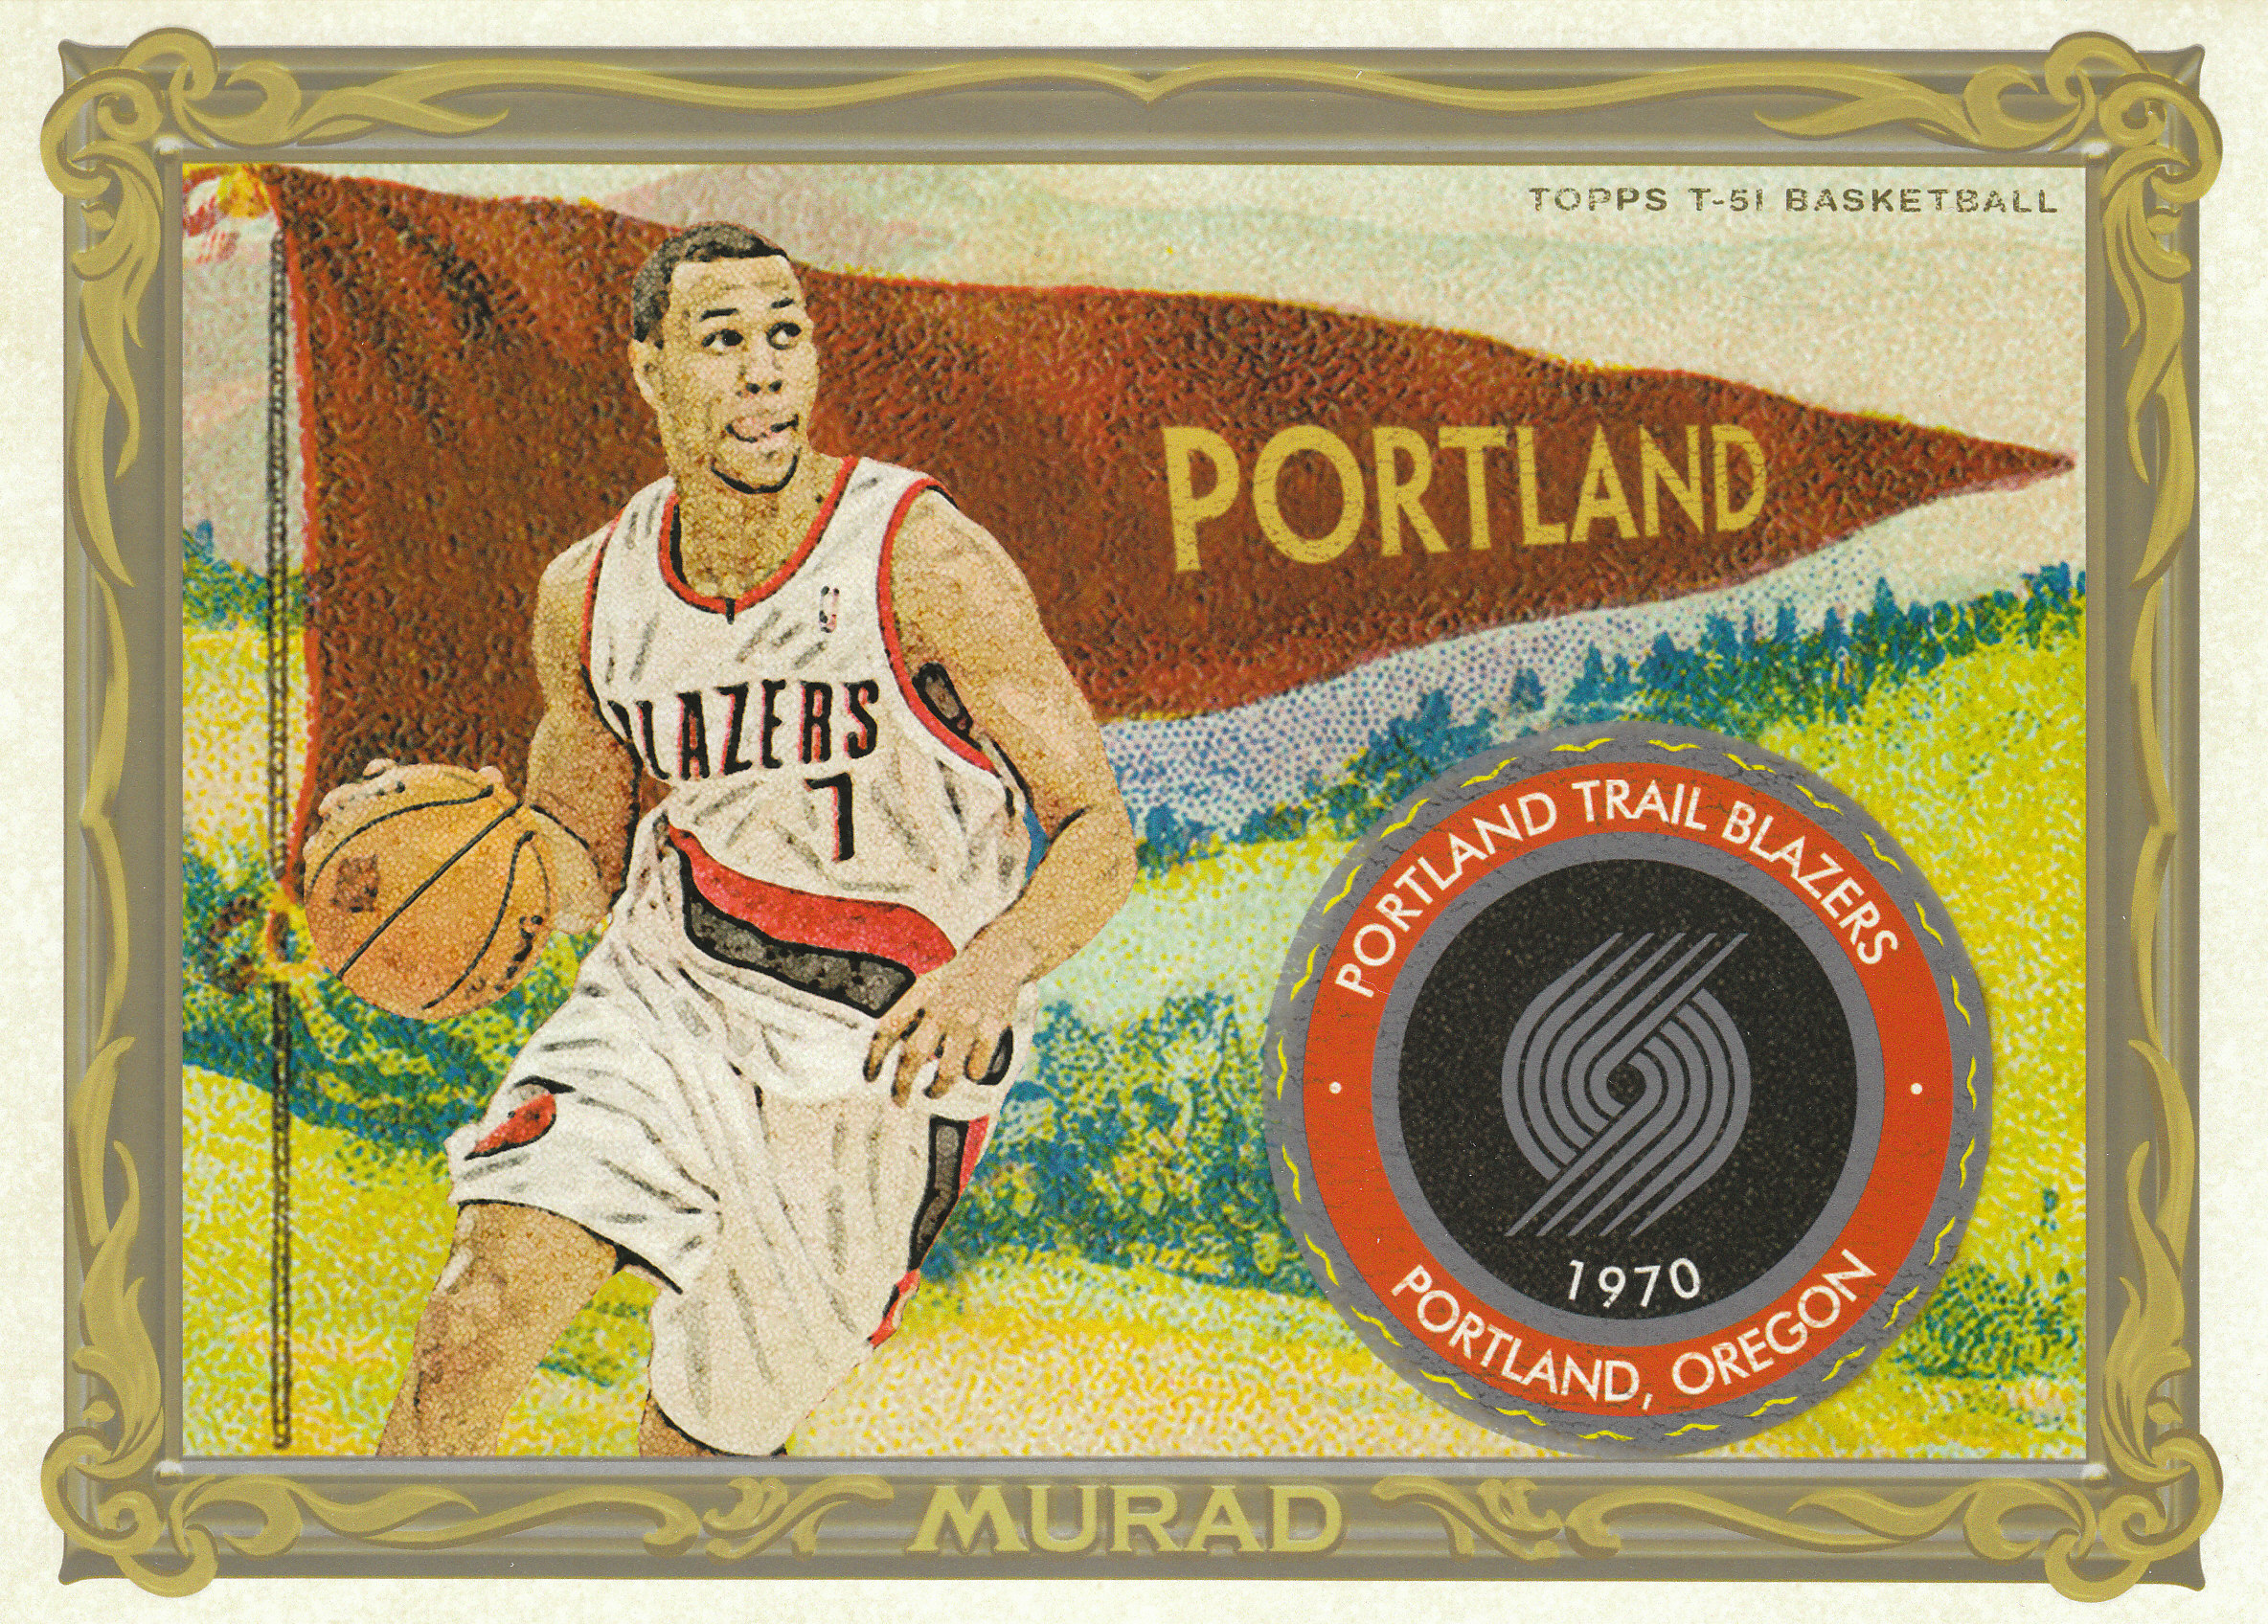 2008-09 Topps T51 Murad T6 Cabinets Silver #T6BR Brandon Roy